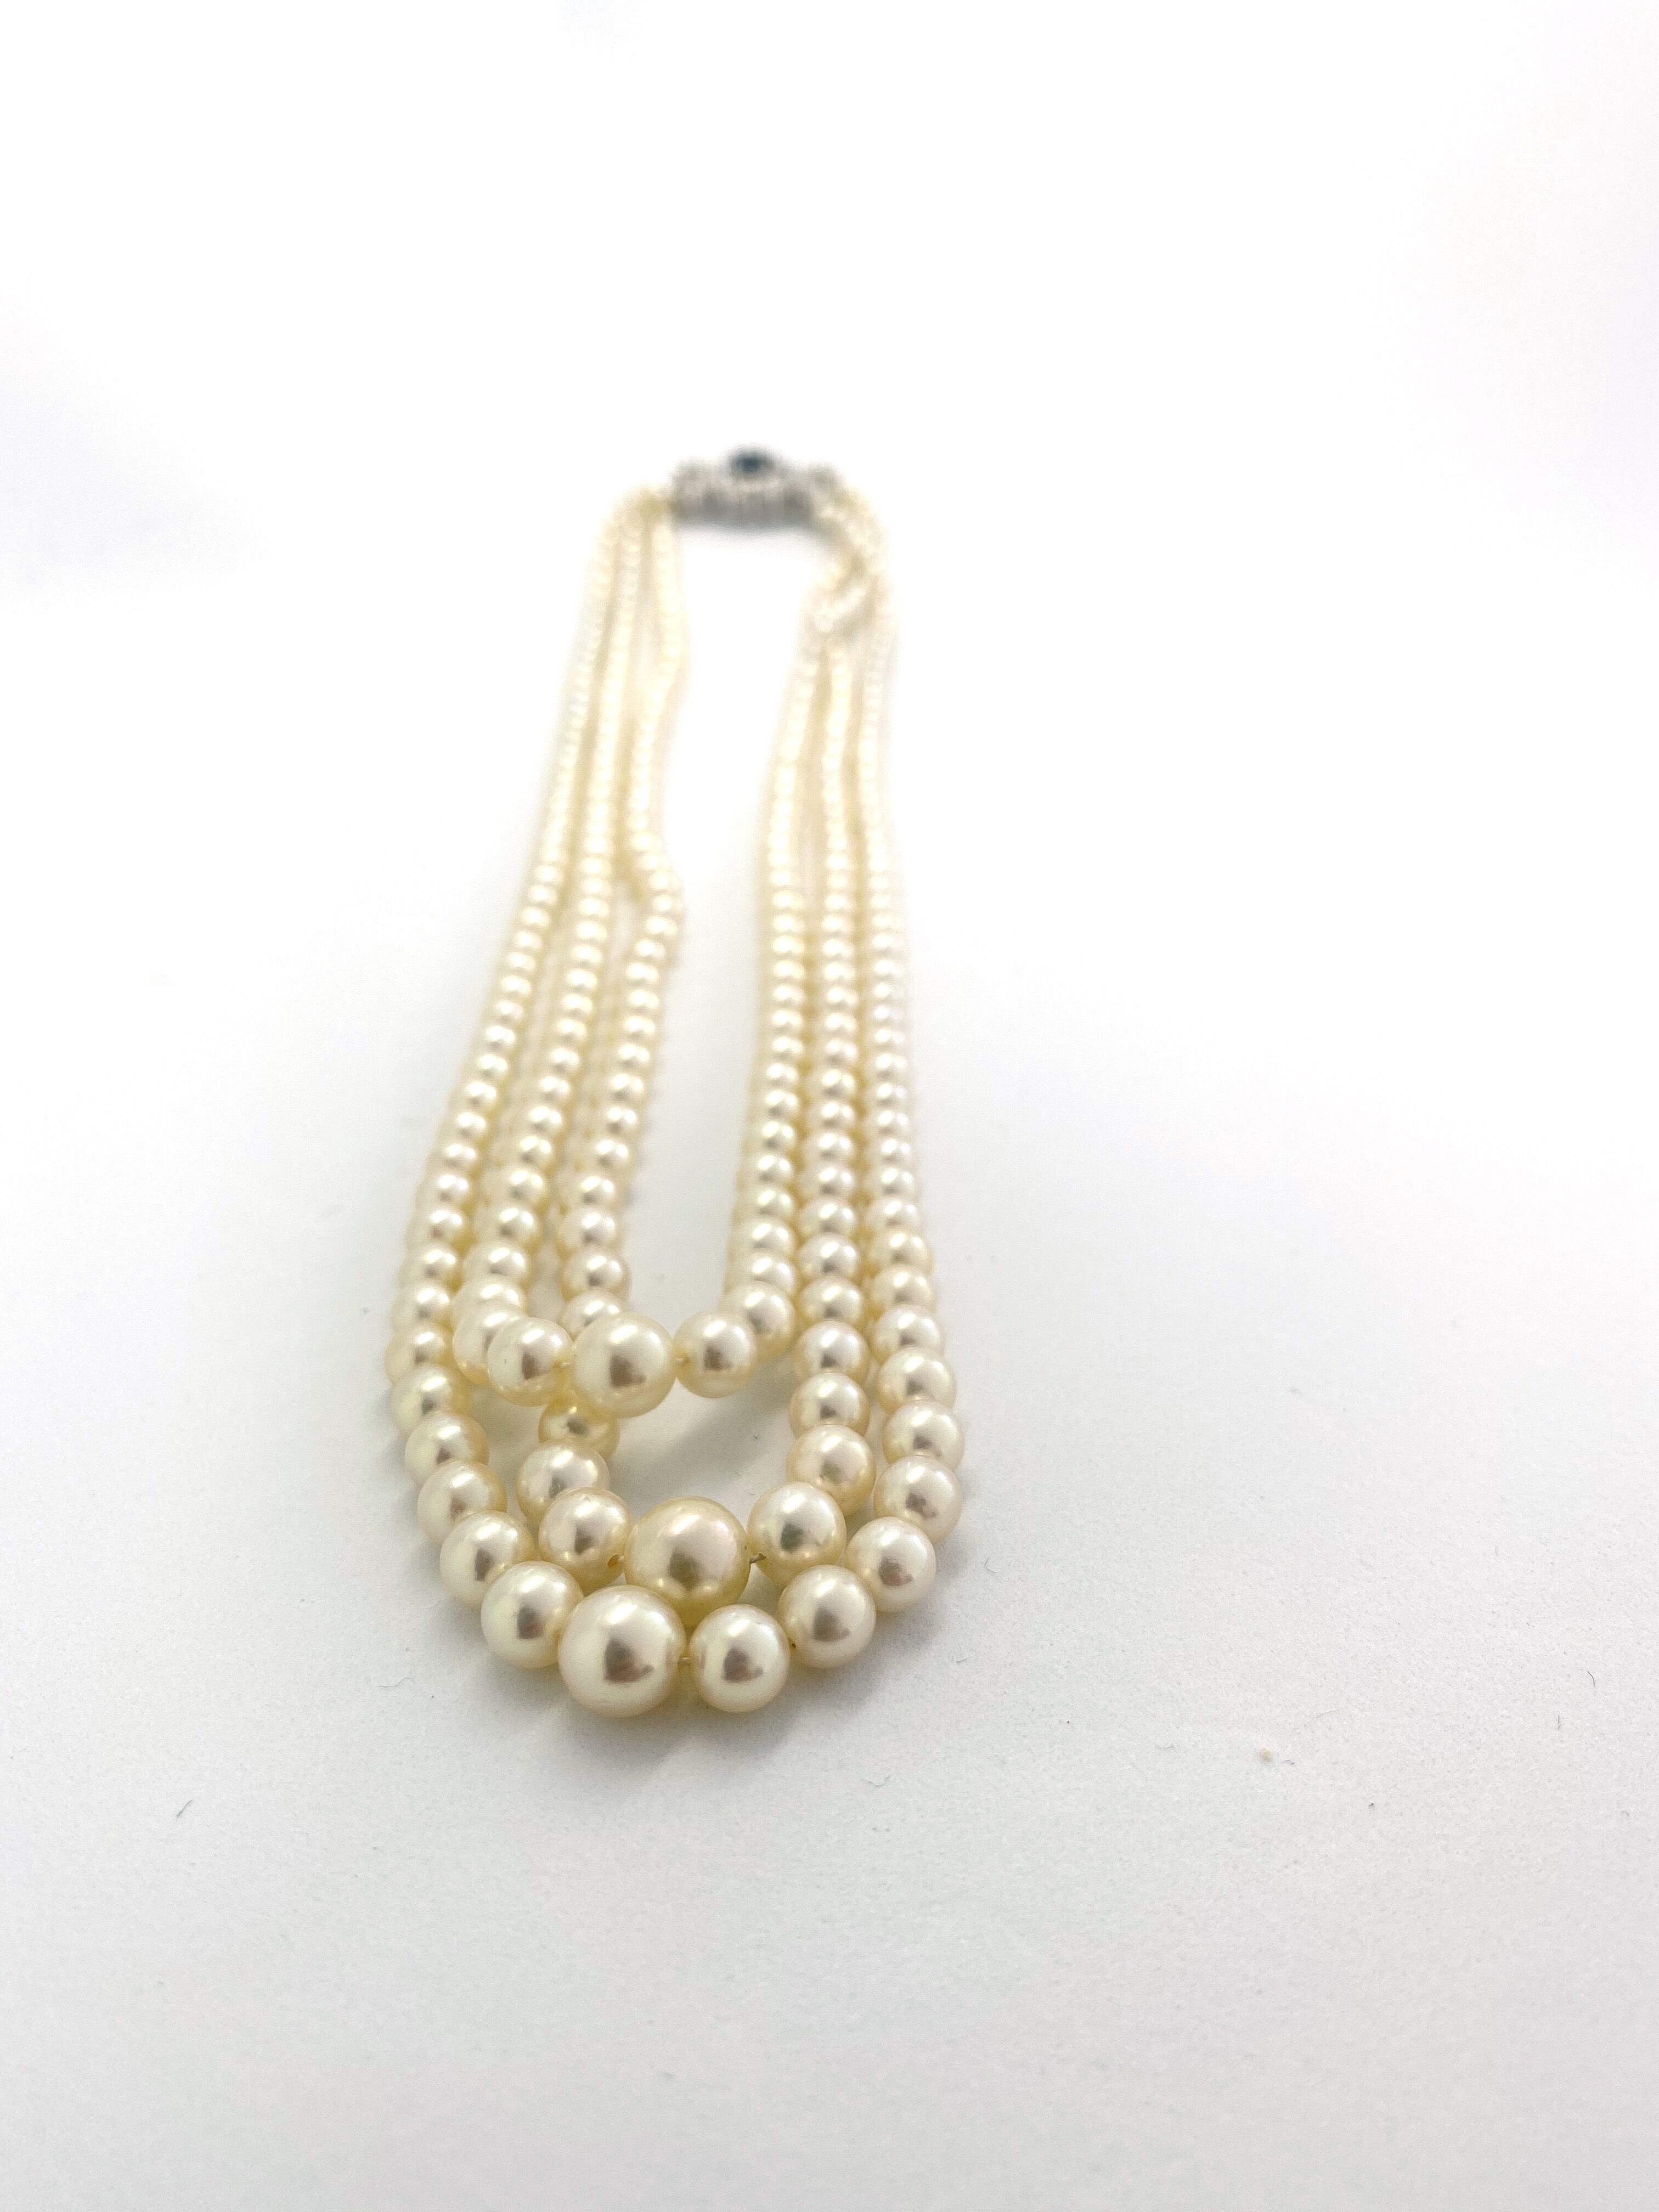 Triple Row Pearl Necklace with Sapphire and Diamond Clasp, three graduating rows of high quality - Image 3 of 4